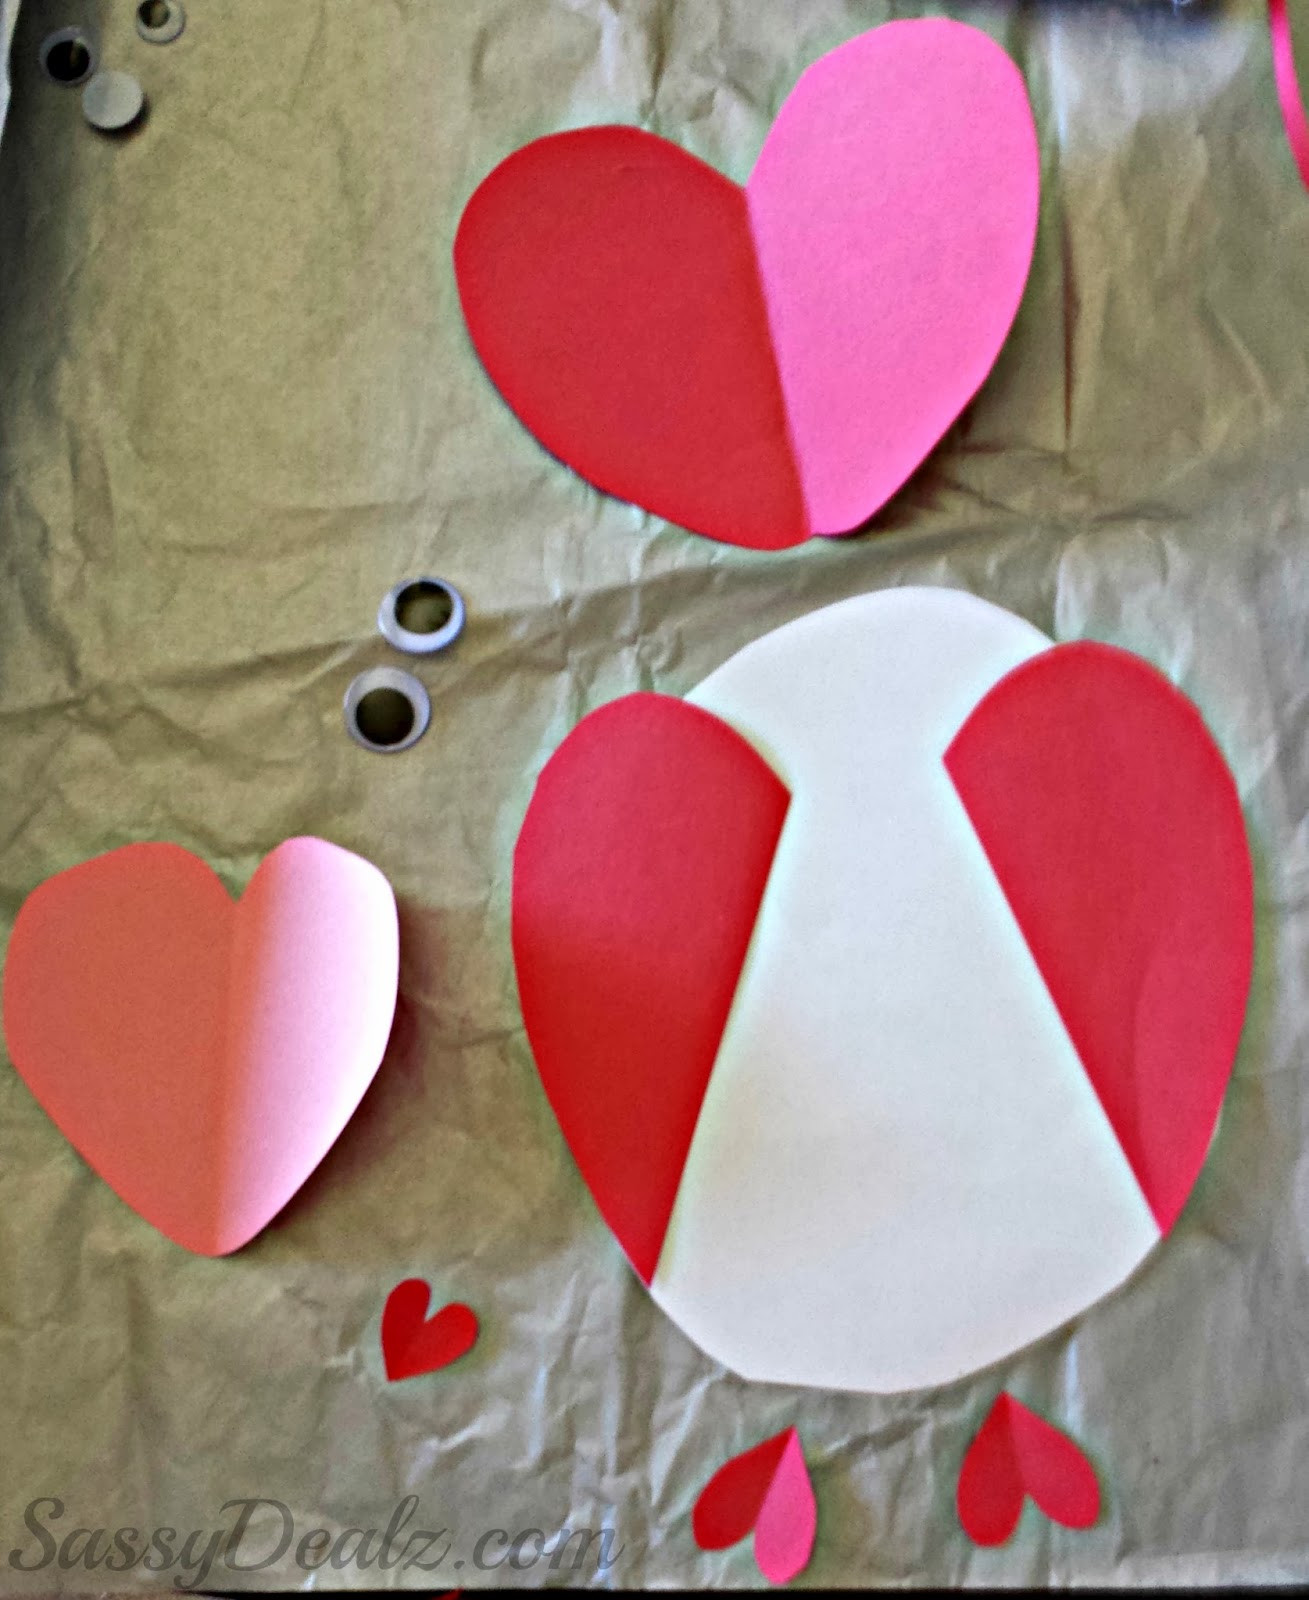 Valentines Day Card Ideas For Kids
 Owl Valentines Day Card Idea For Kids Crafty Morning